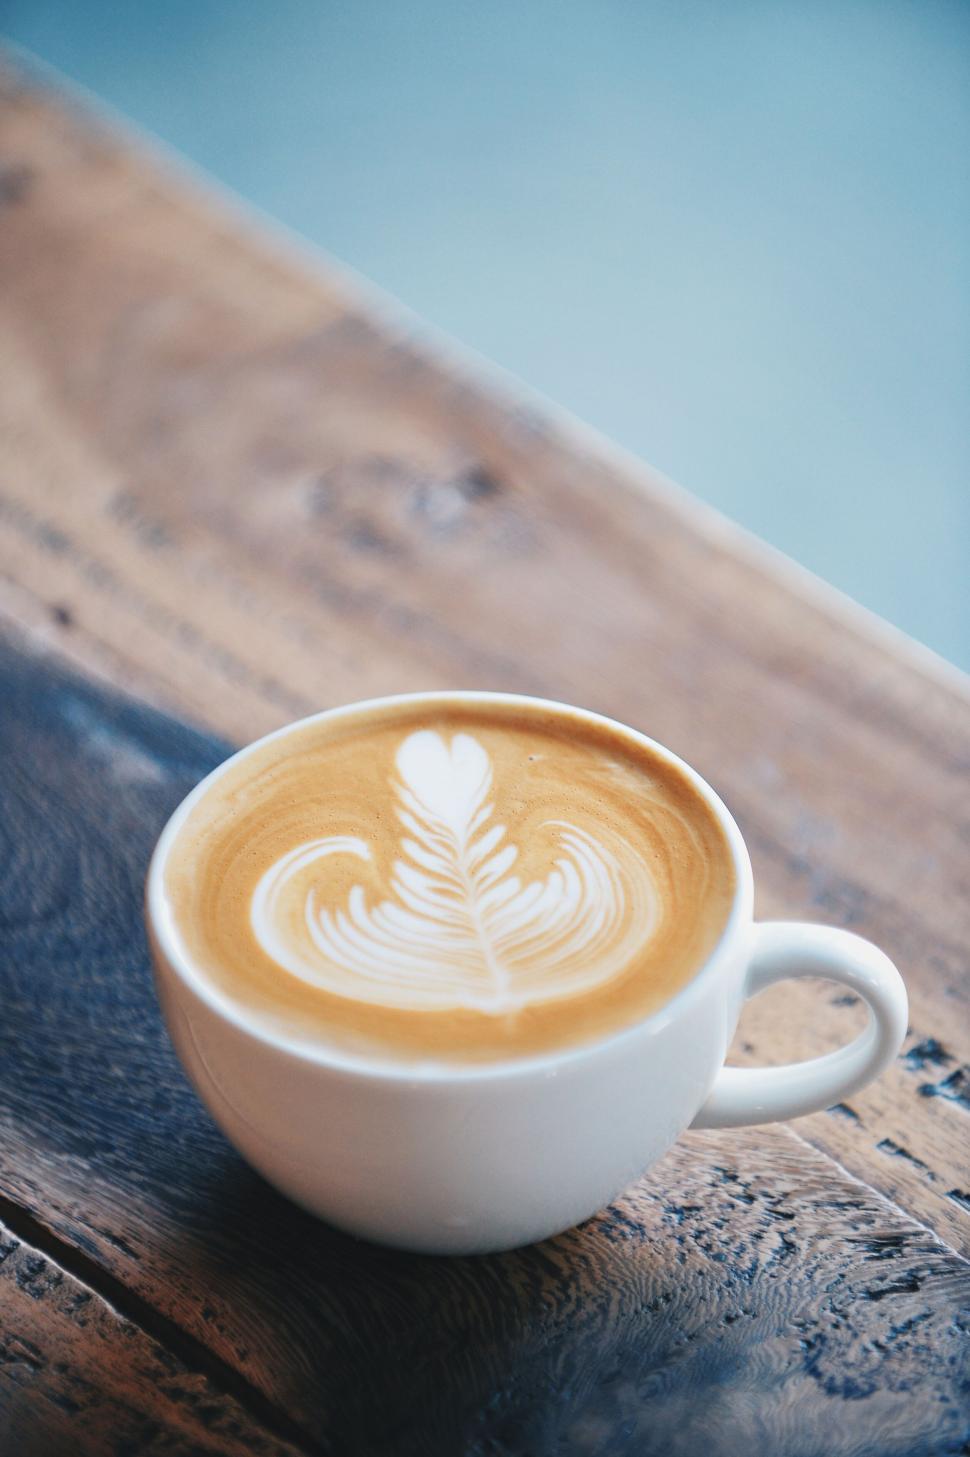 Free Image of A cup of coffee with a leaf design in the foam 